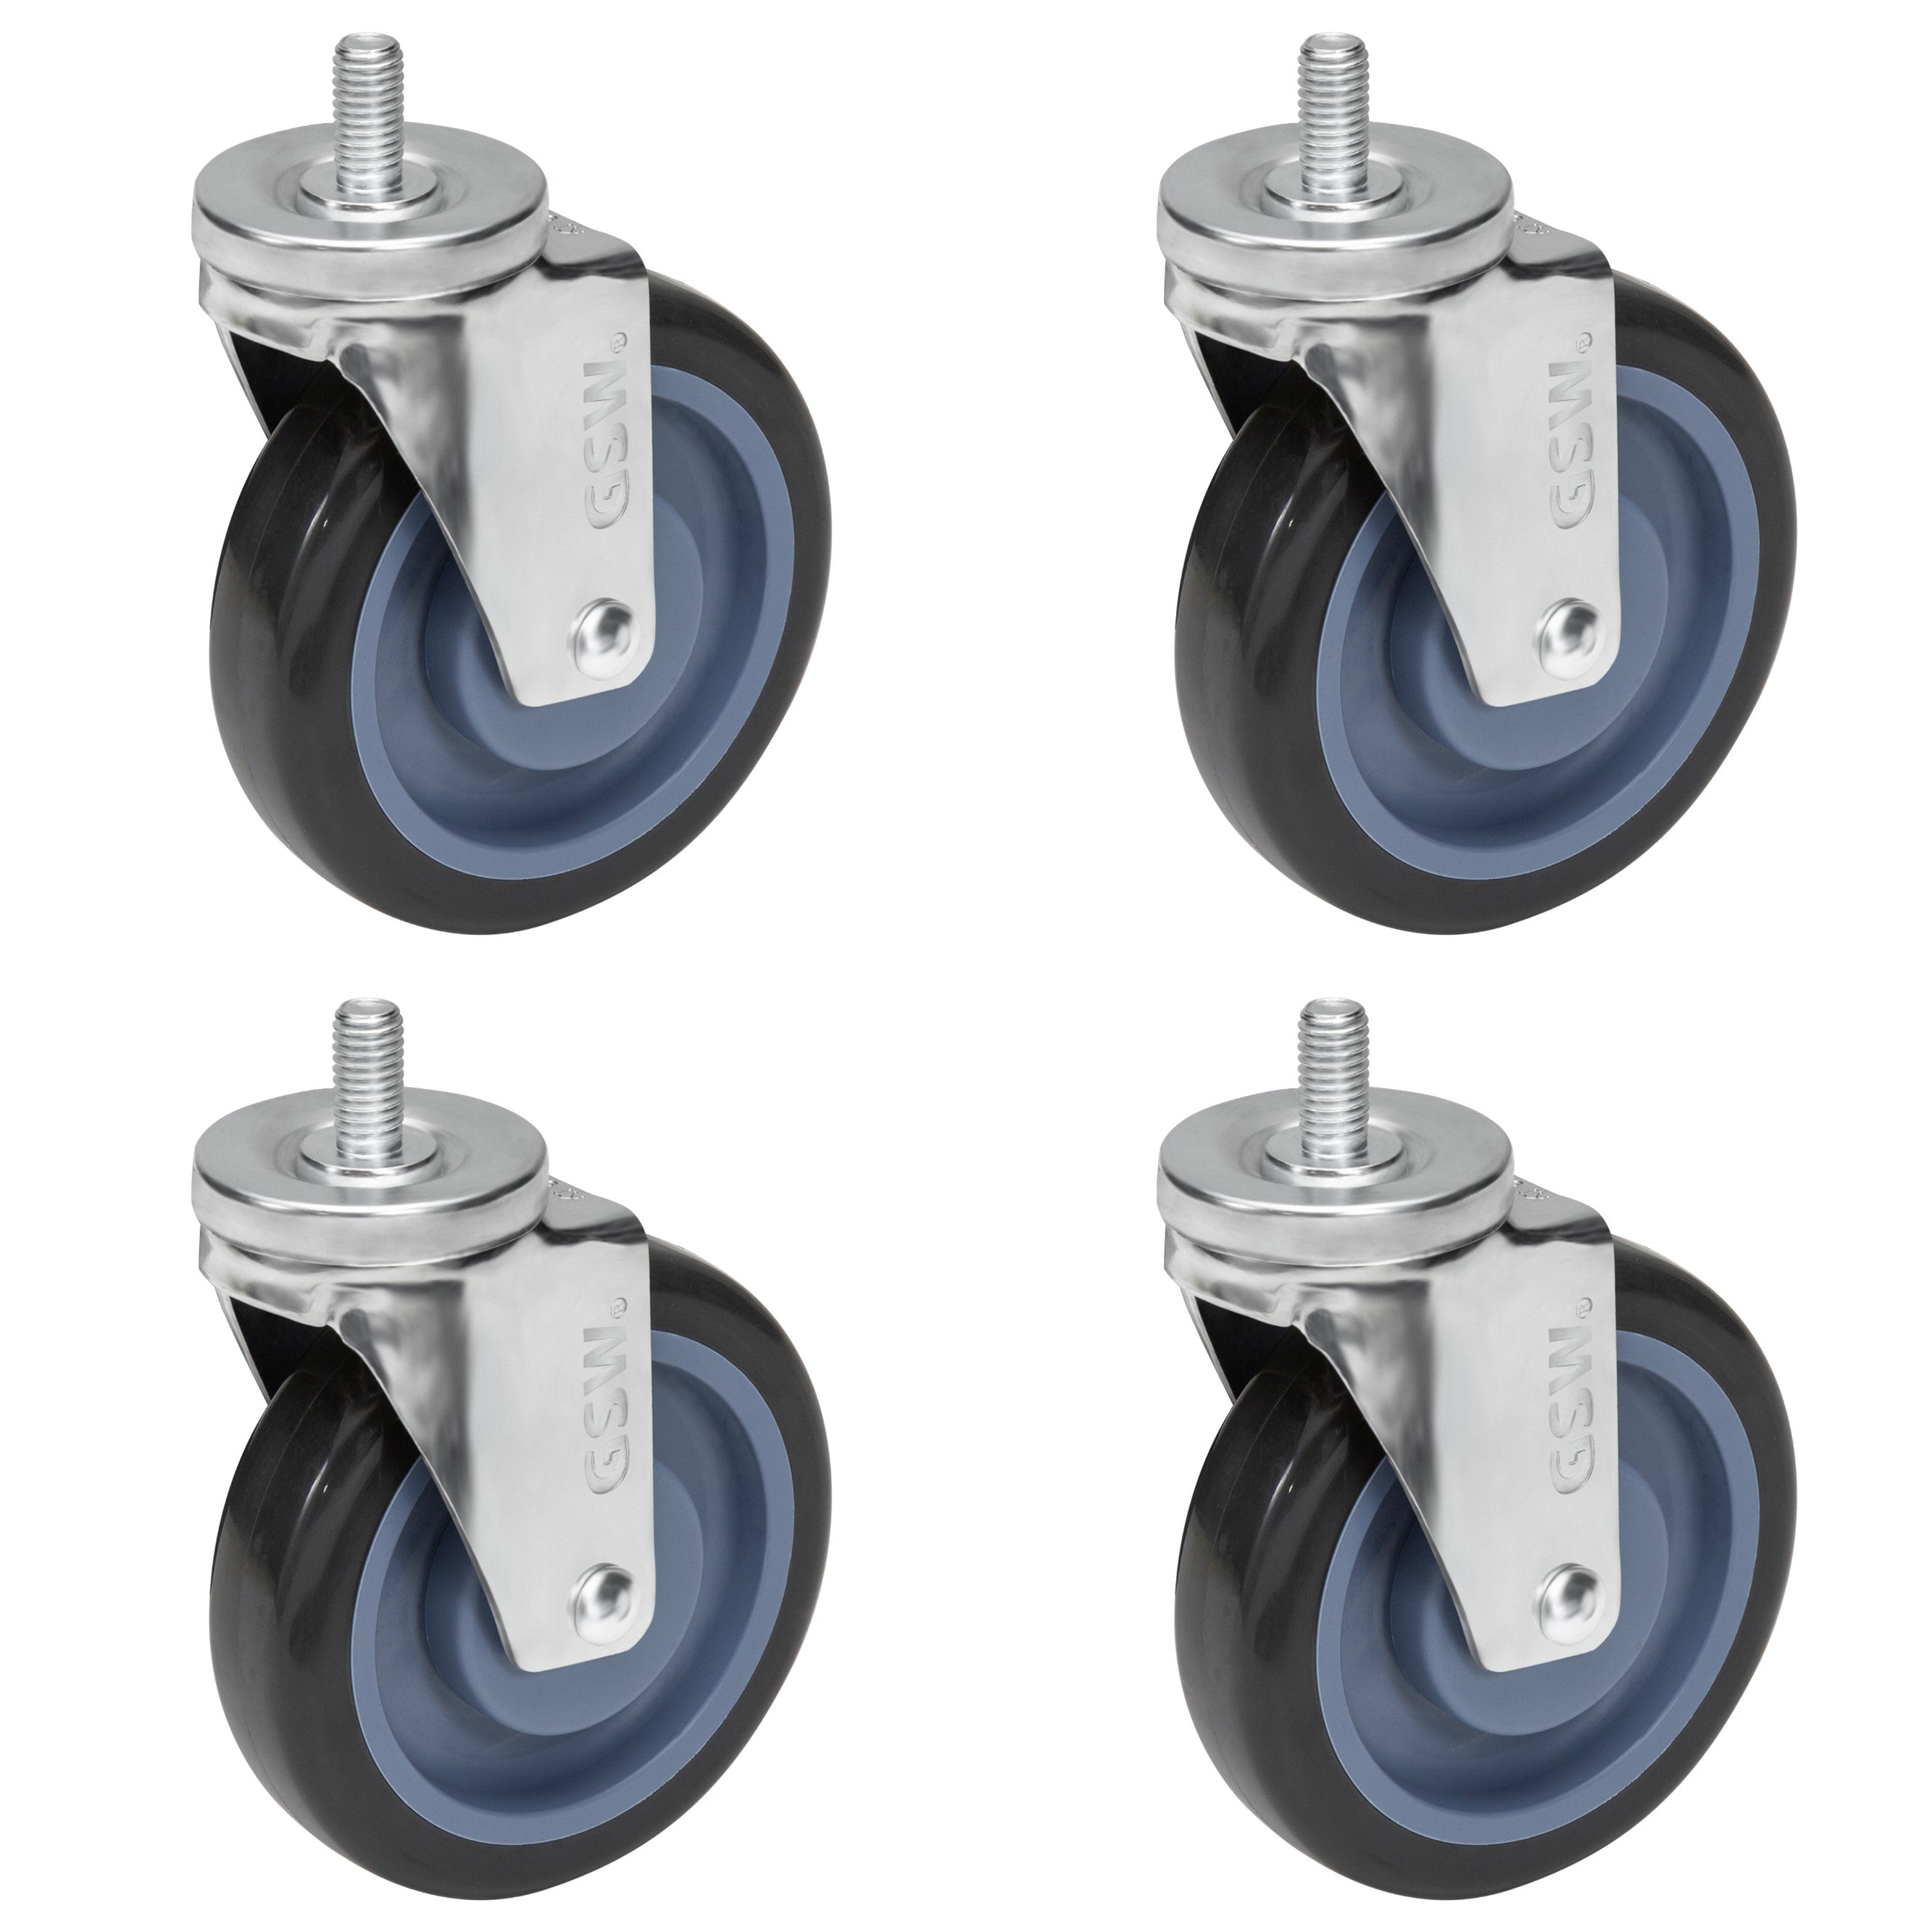 GSW 5" Caster Replacement Shopping Cart Wheels, Polyurethane Stem Casters Set of 4 for most refrigerators, Cart with Loading Capacity 1480 Lbs (Swivel)